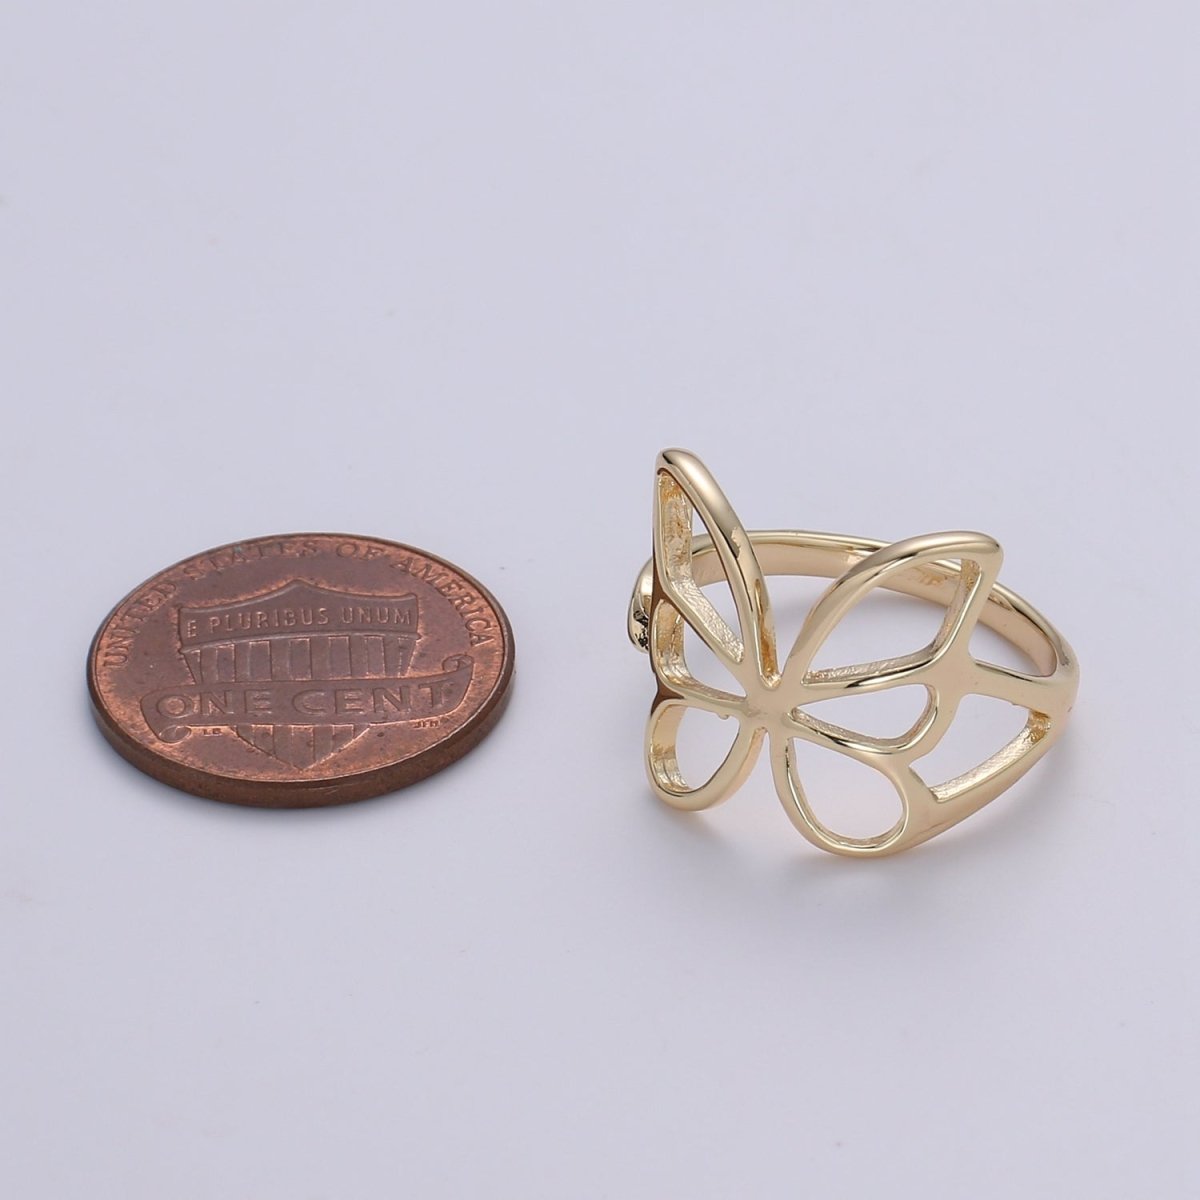 Gold Butterfly Ring, Mariposa Ring, Monarch Ring, Bold Gold Open Adjustable Knot Ring, Animal Gold Minimalist Ring O-314 - DLUXCA